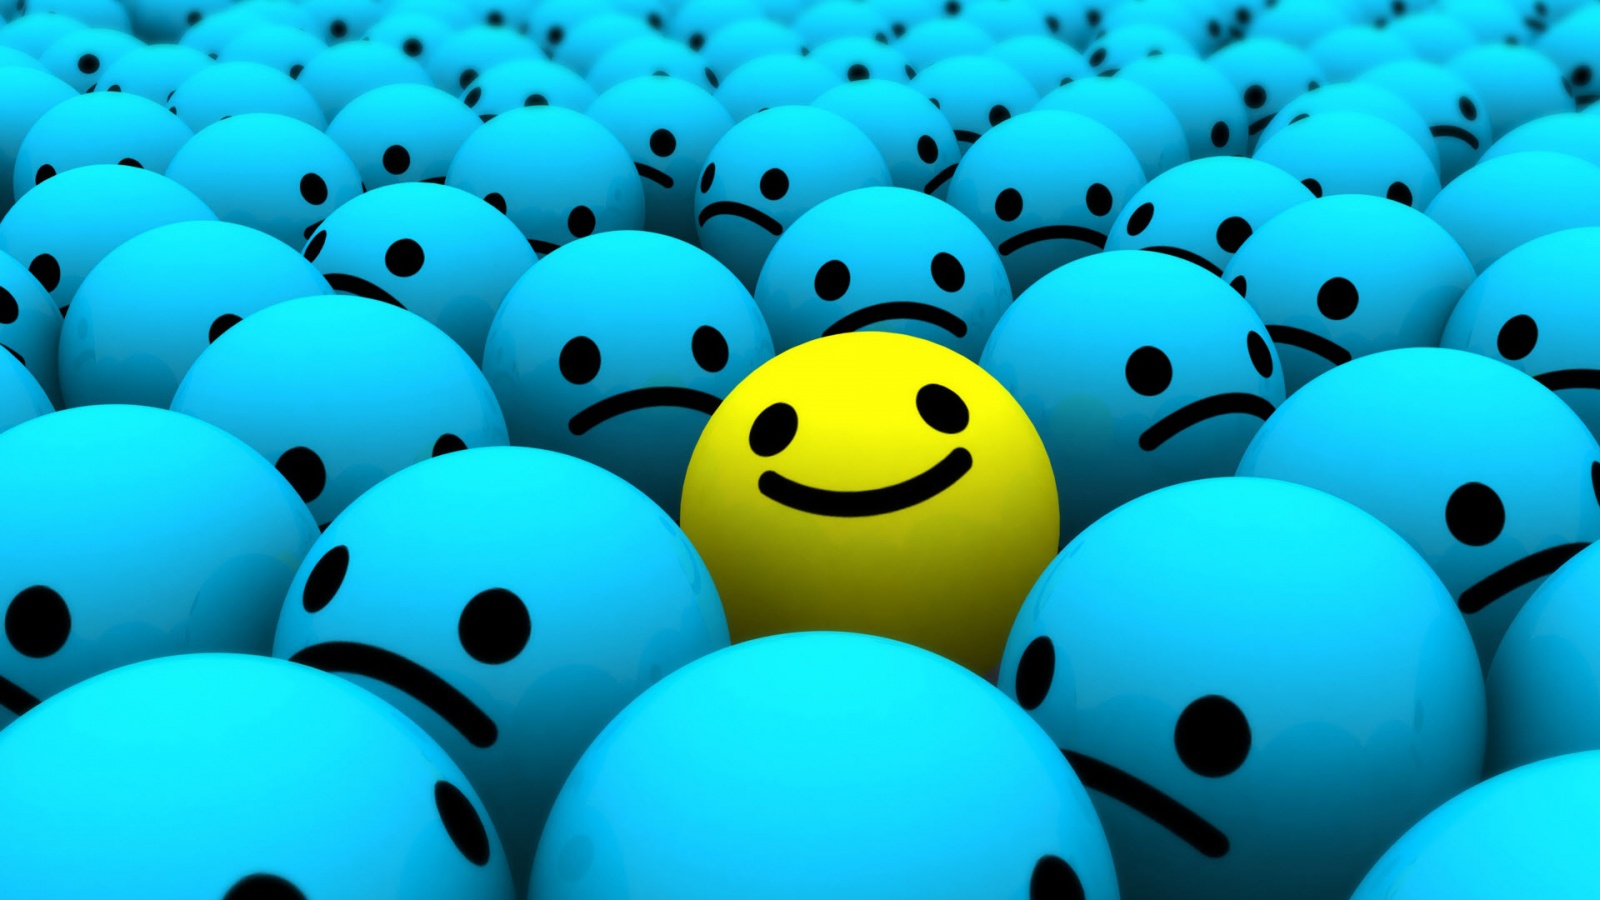 Smiley Faces images smile HD wallpaper and background photos